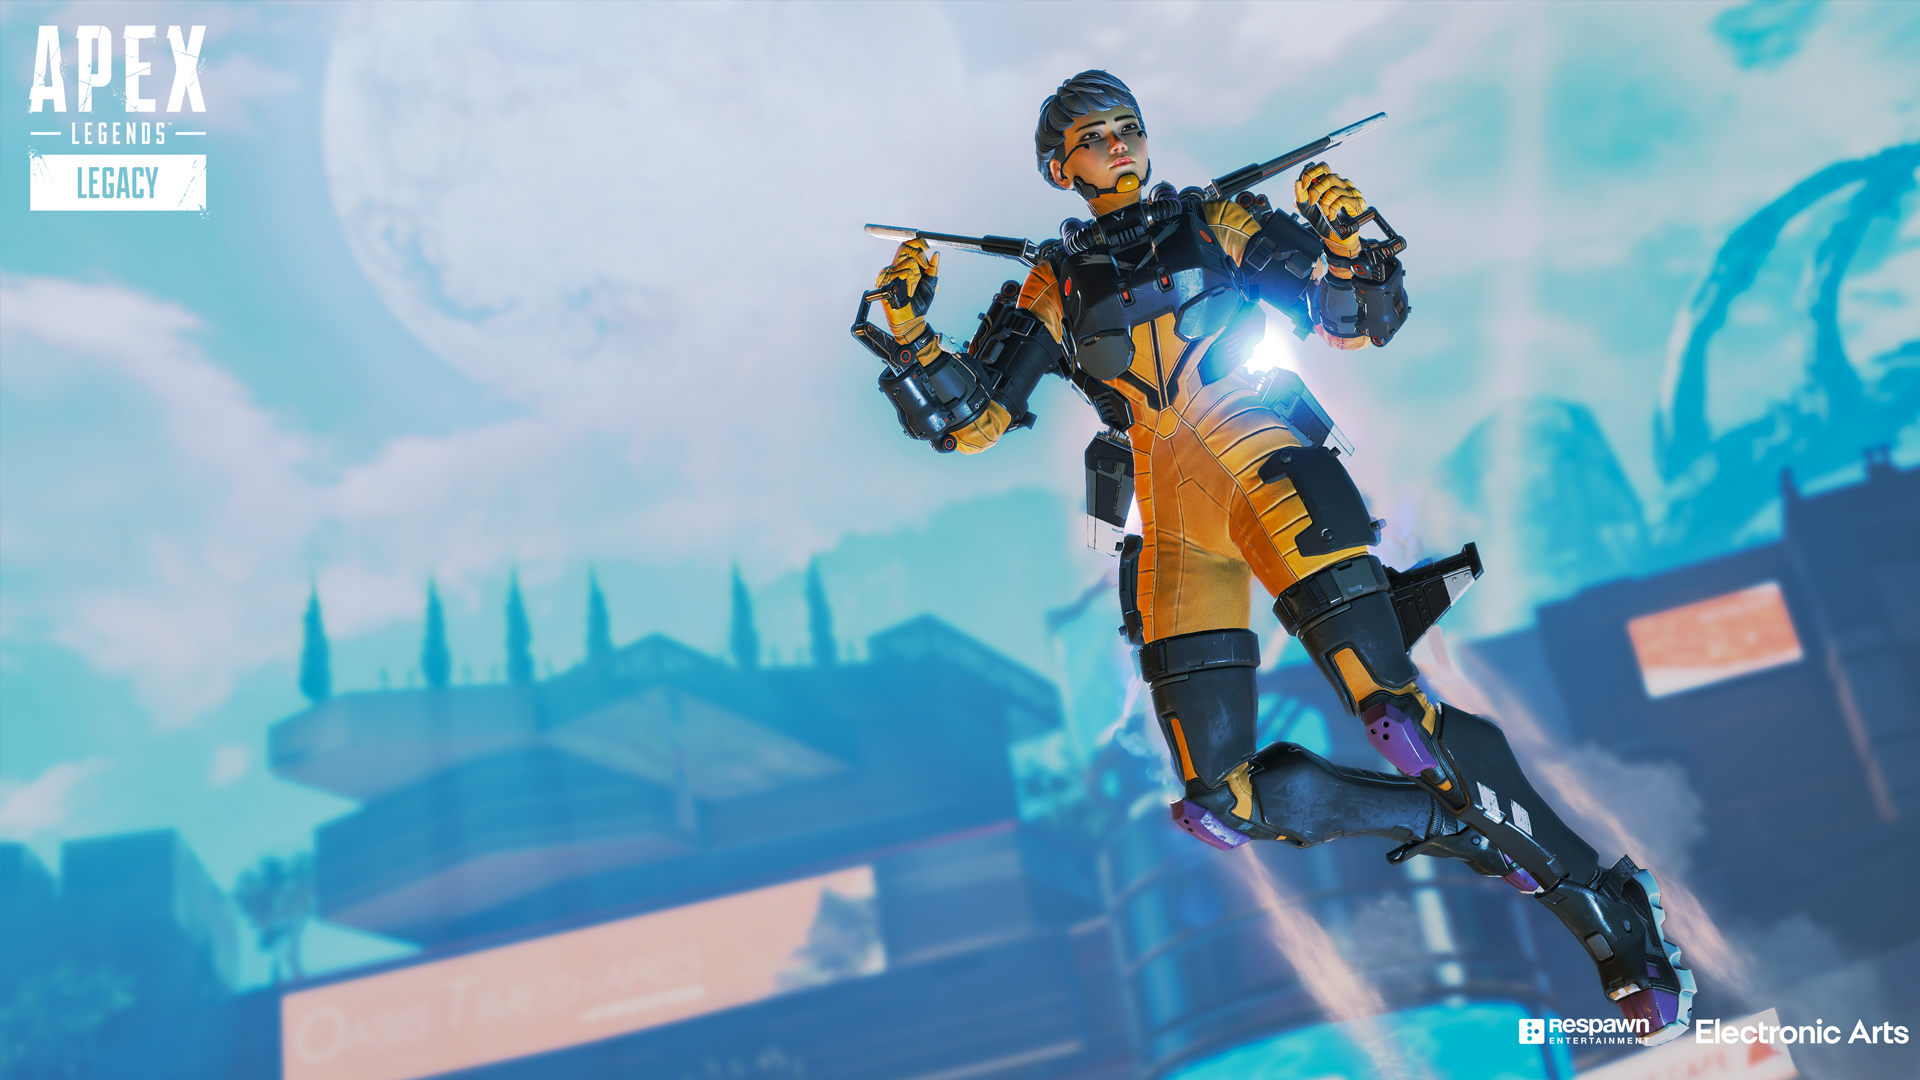 How To Turn Off Crossplay In Apex Legends Dot Esports